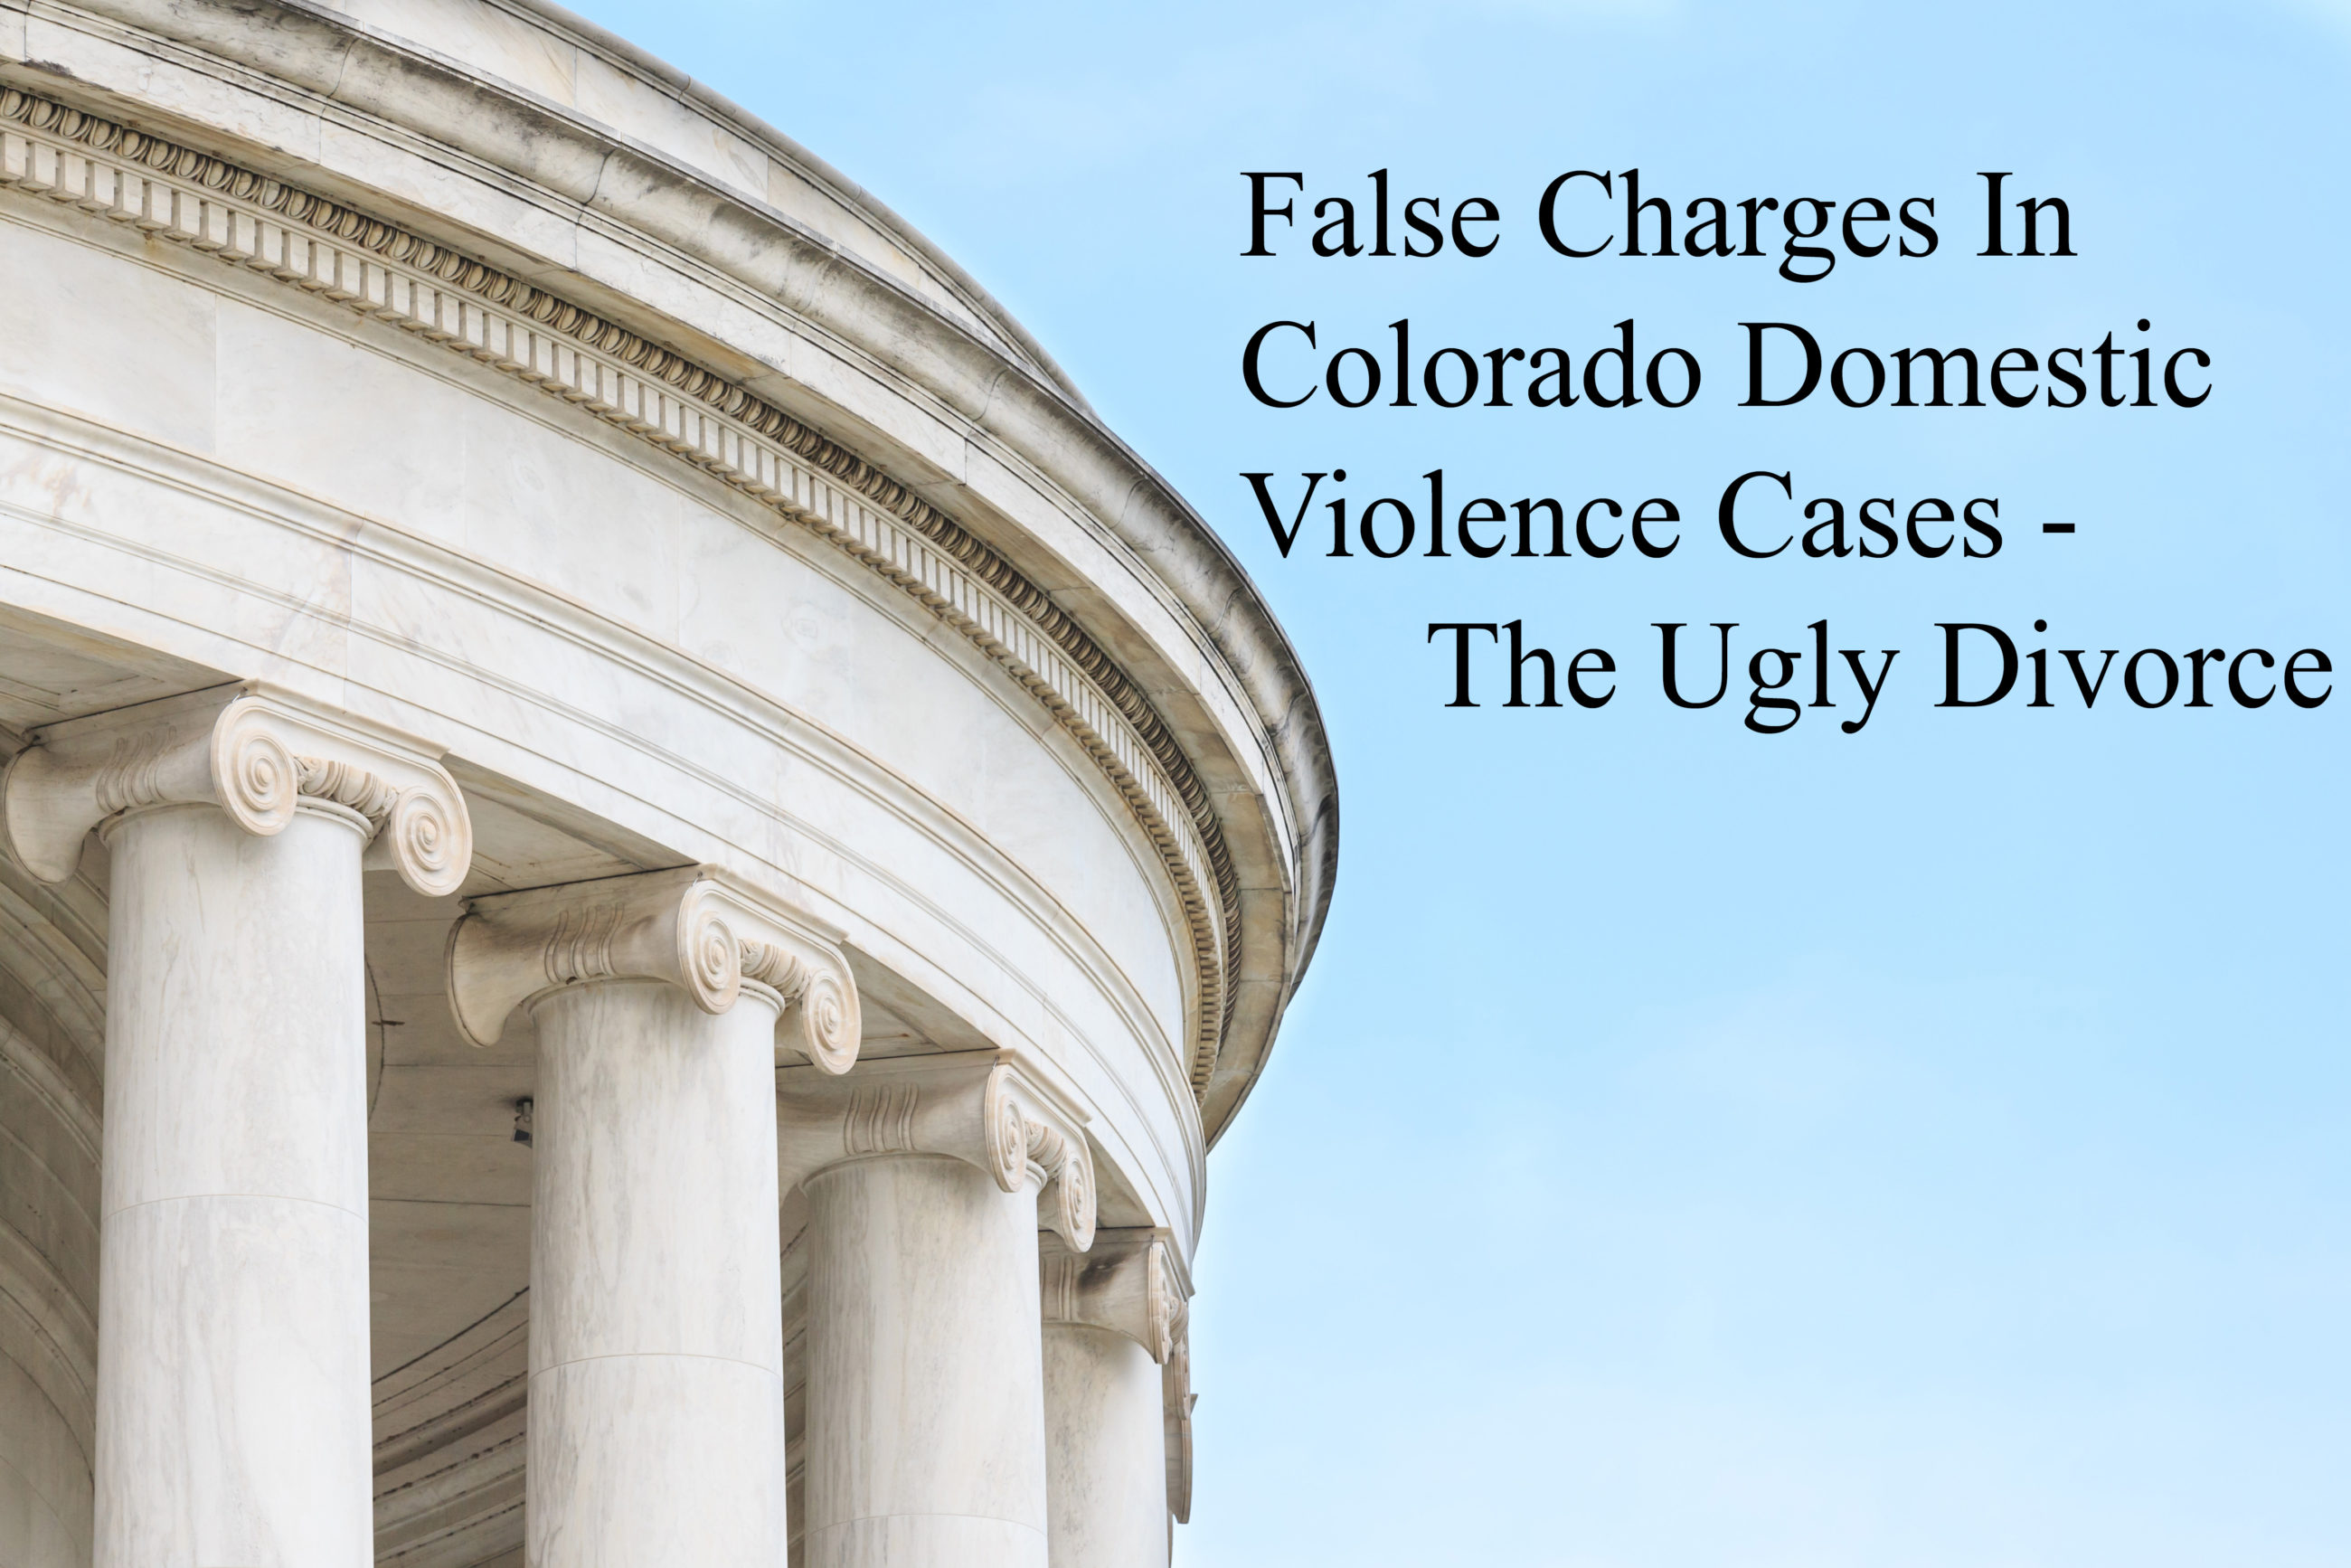 False Charges In Colorado Domestic Violence Cases - The Ugly Divorce